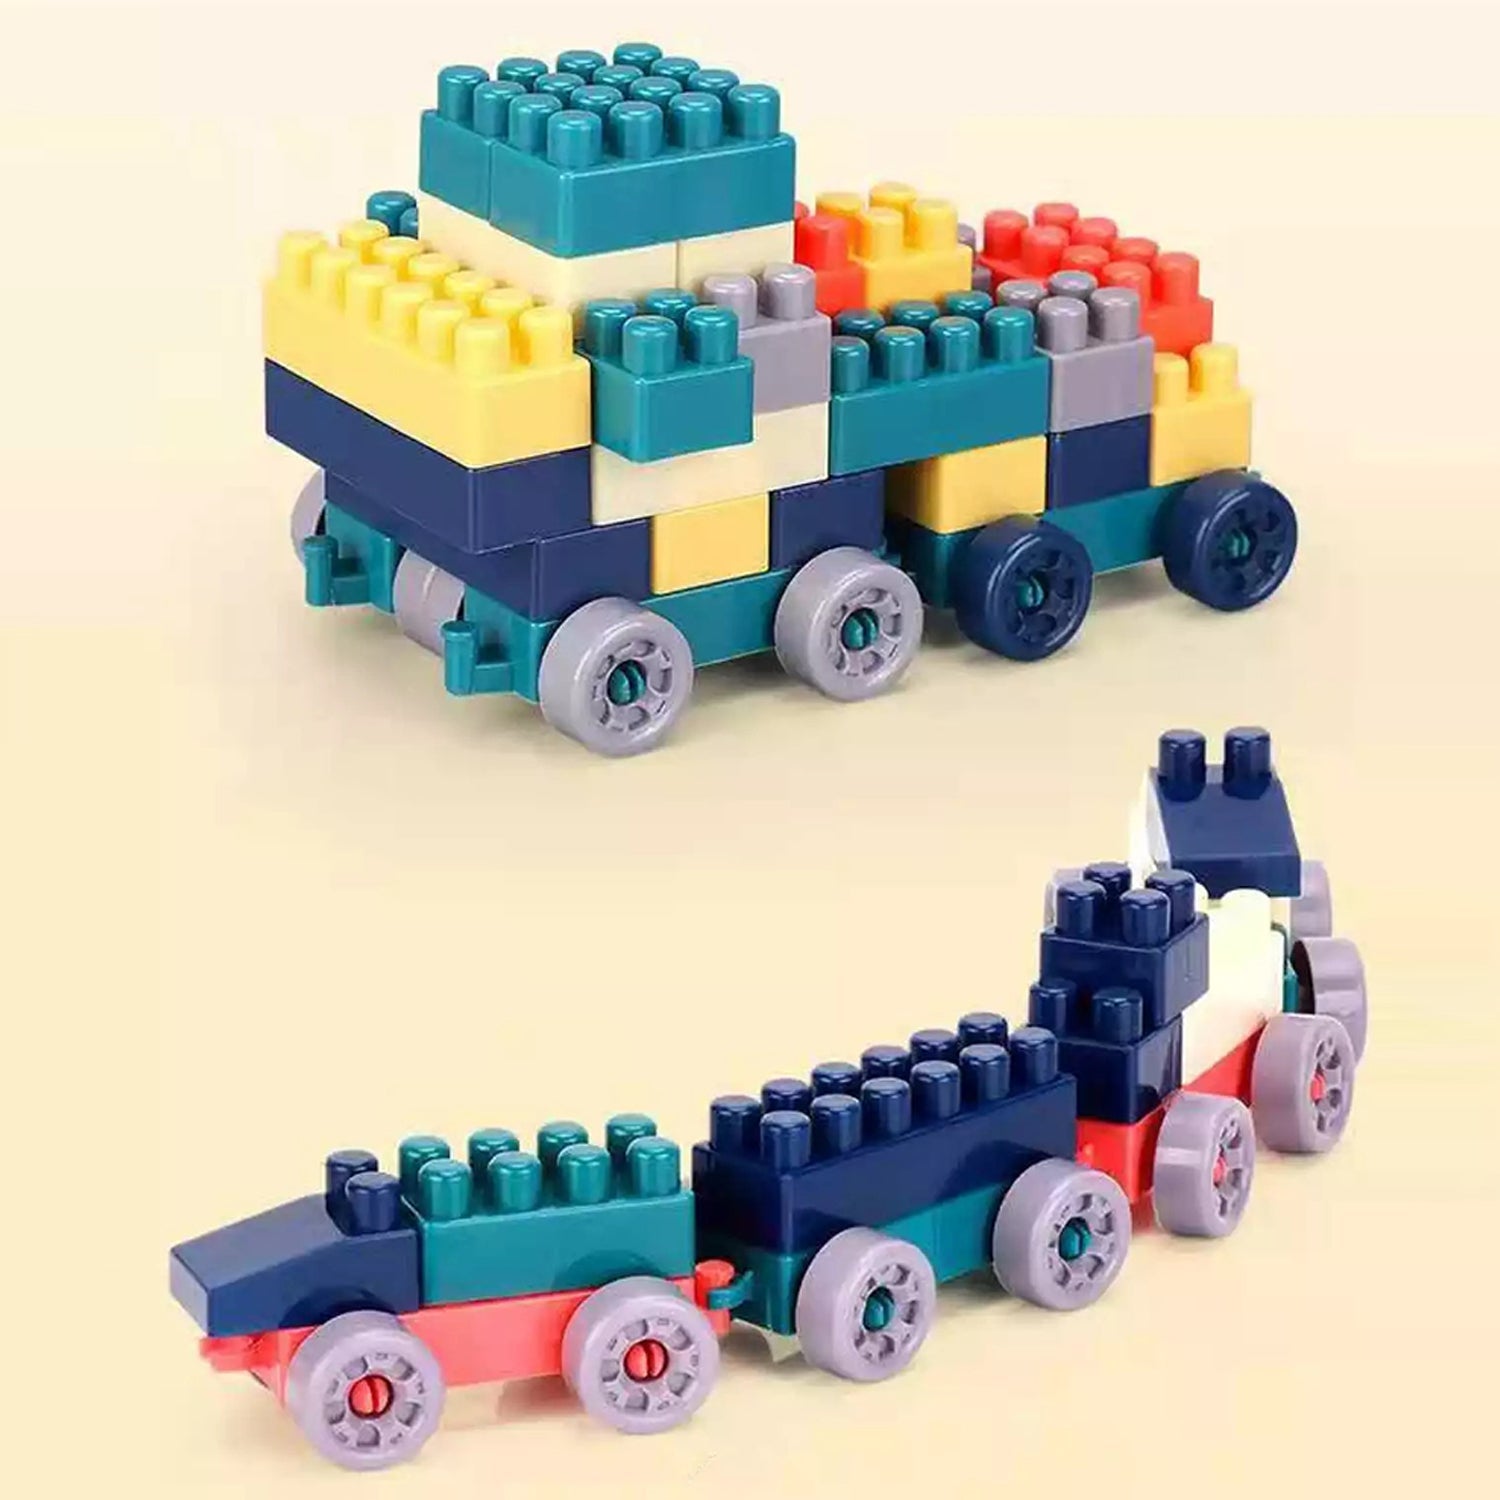 3919 100 Pc Train Candy Toy used in all kinds of household and official places specially for kids and children for their playing and enjoying purposes.